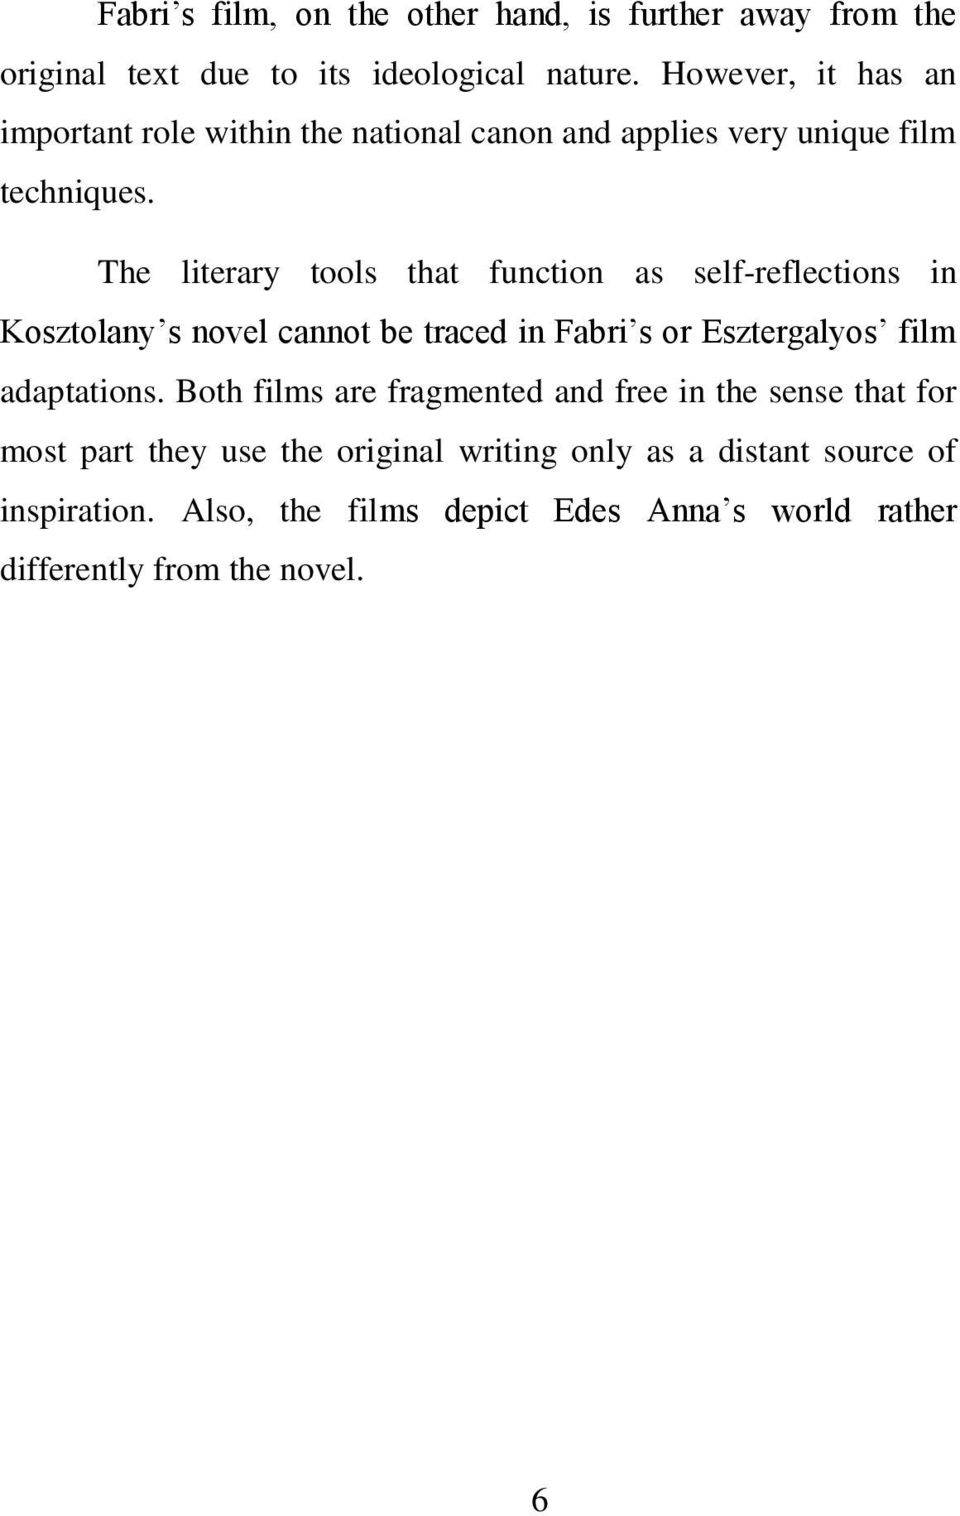 The literary tools that function as self-reflections in Kosztolany s novel cannot be traced in Fabri s or Esztergalyos film adaptations.